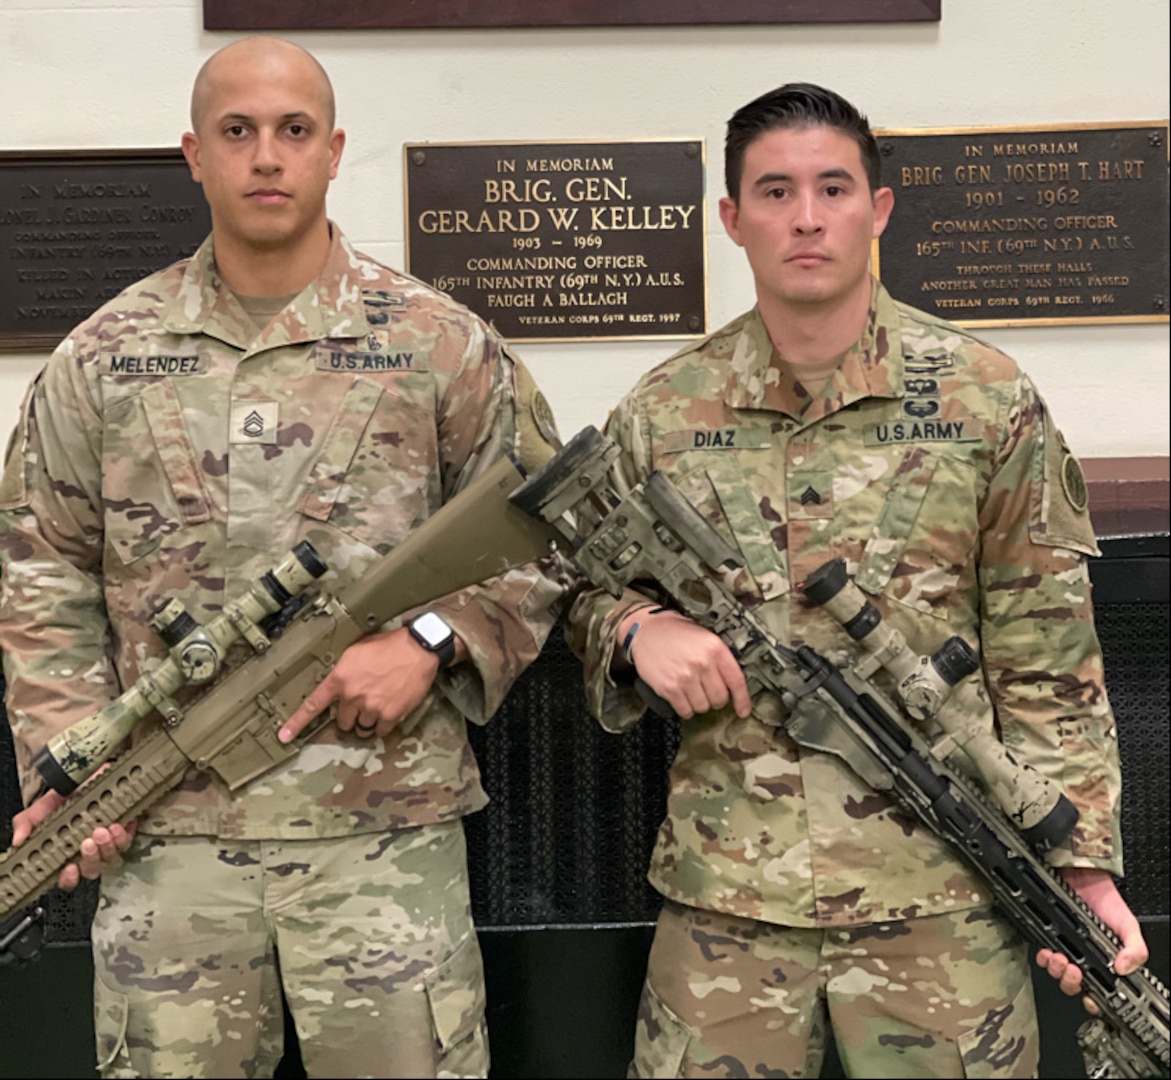 New York Army National Guard's Sgt 1st Class Matthew Melendez ( left) and Sgt. Andreas Diaz, both members of the 1st Battalion, 69th Infantry, pose for a photograph in the unit's historic Lexington Avenue Armory in New York City on Nov. 25, 2020.